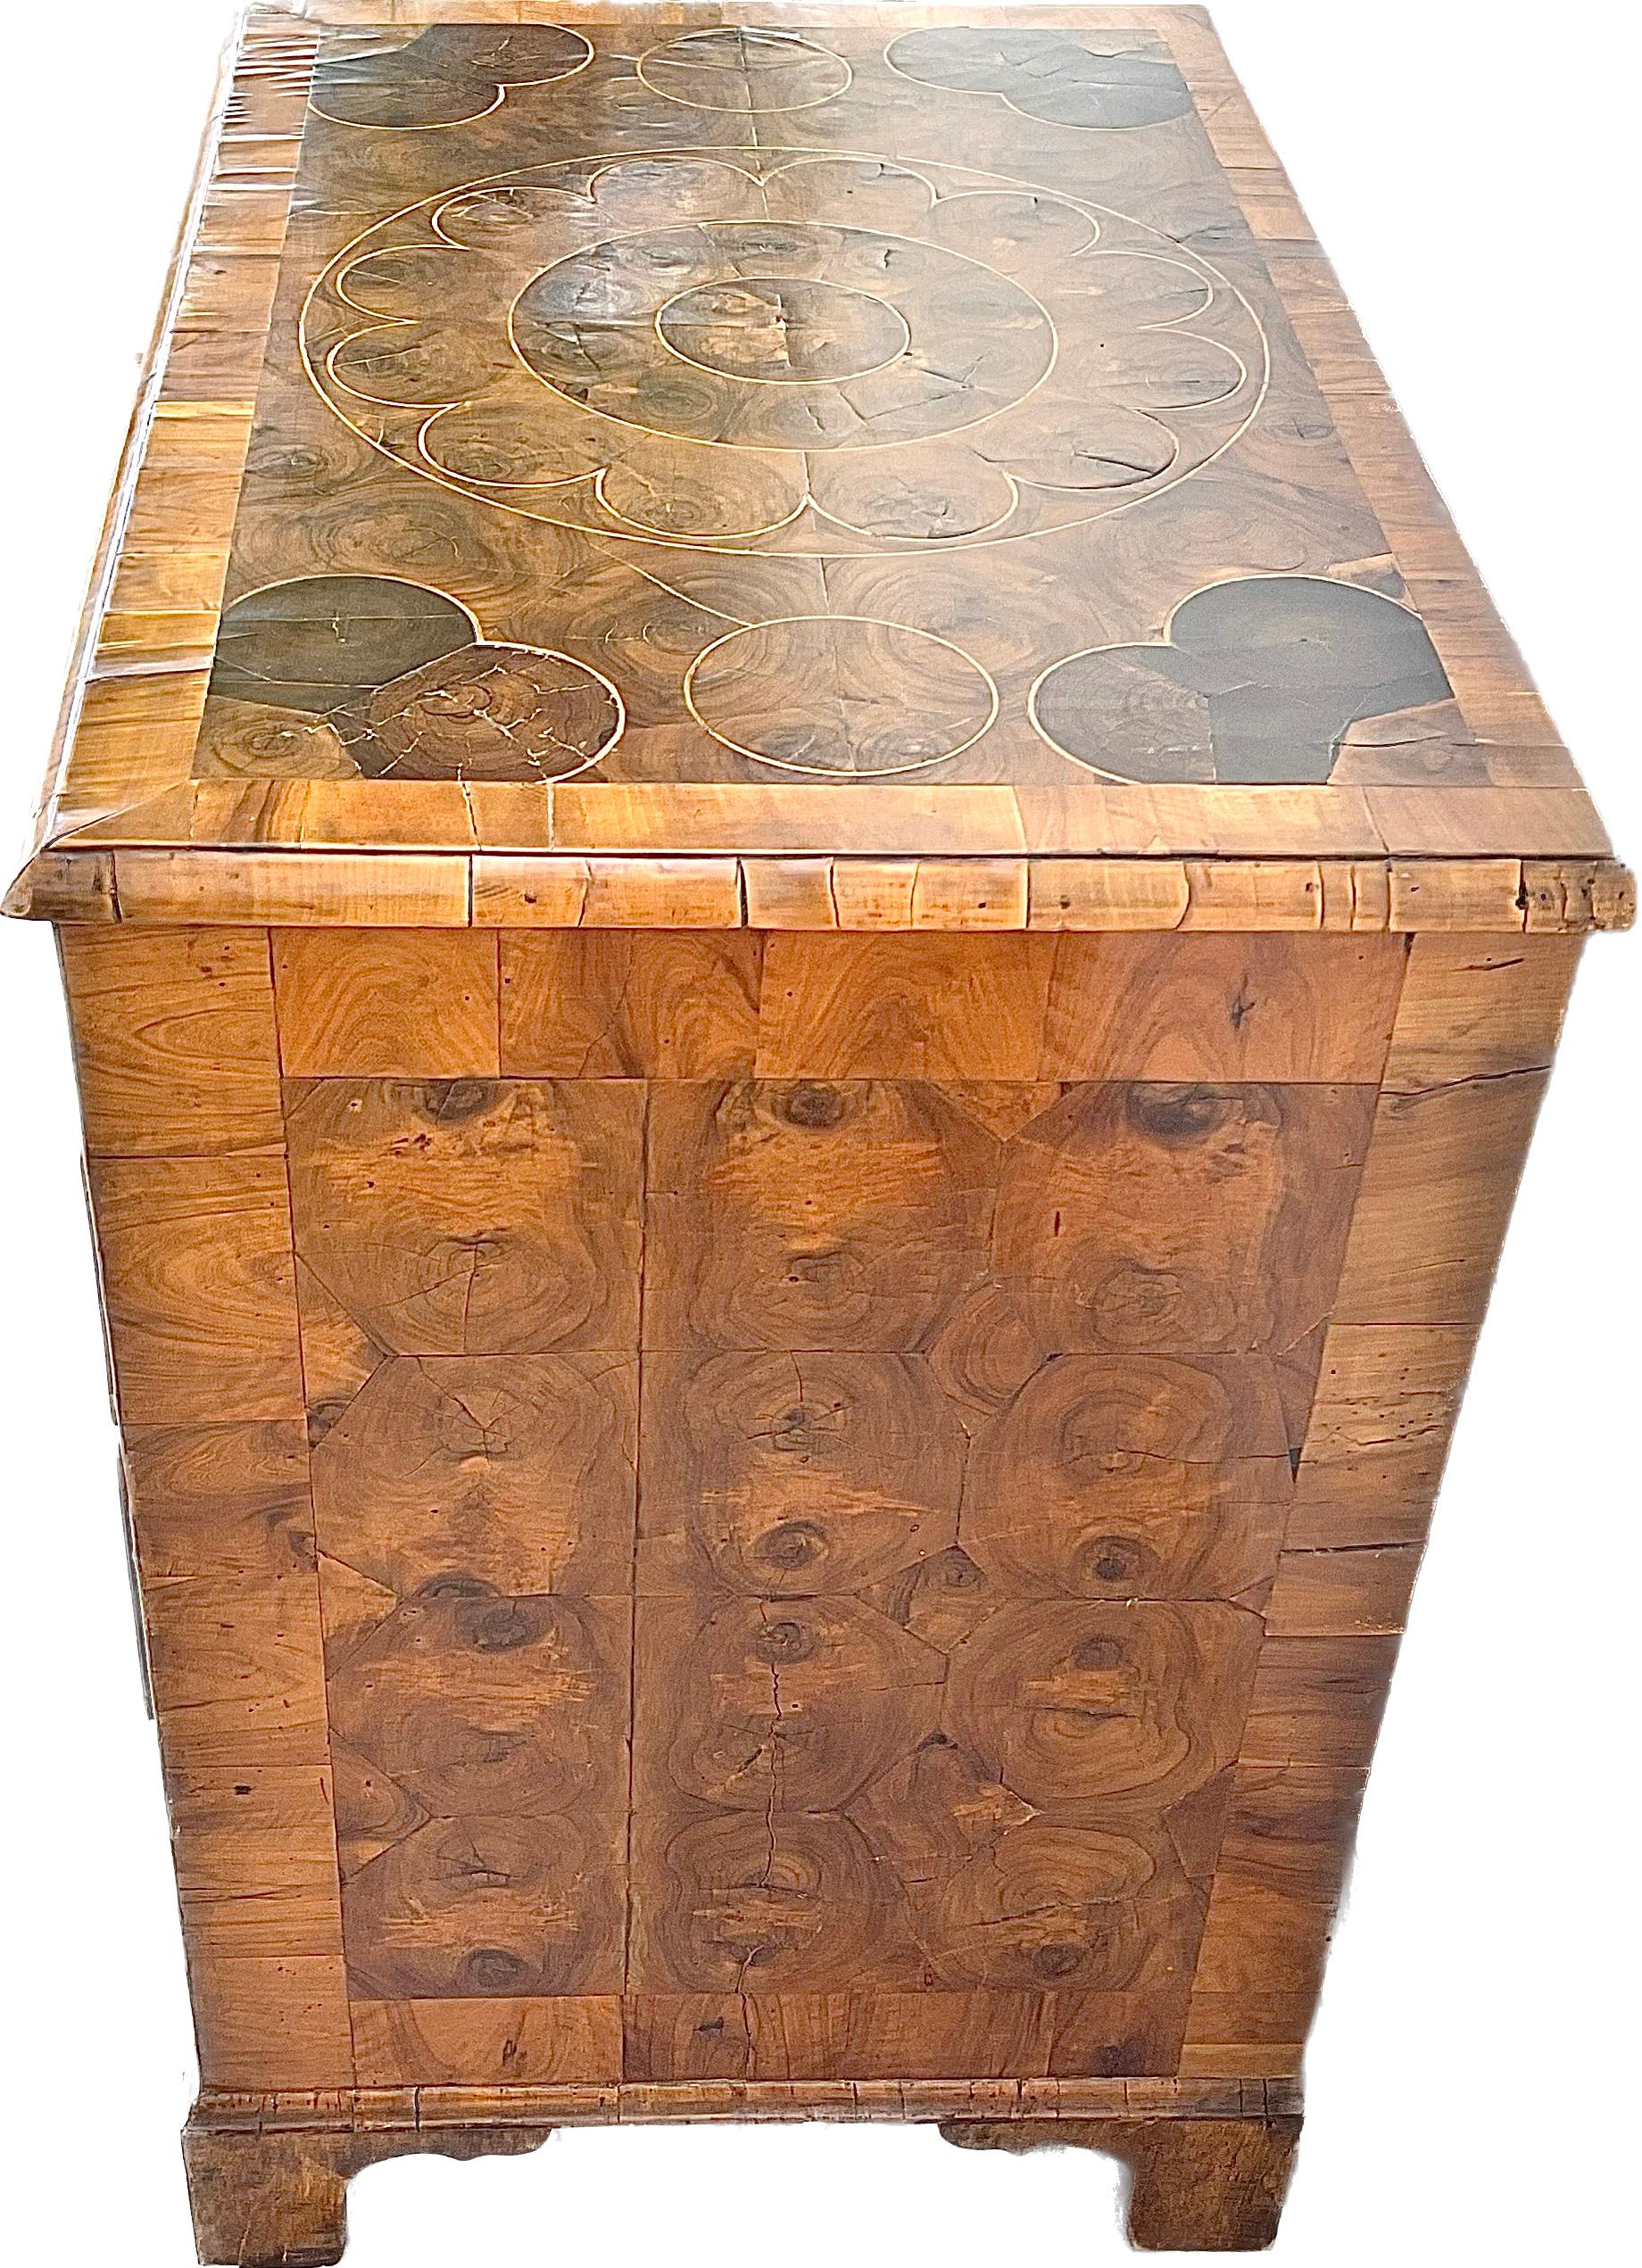 Wood William And Mary Inlaid Oyster Veneered Chest